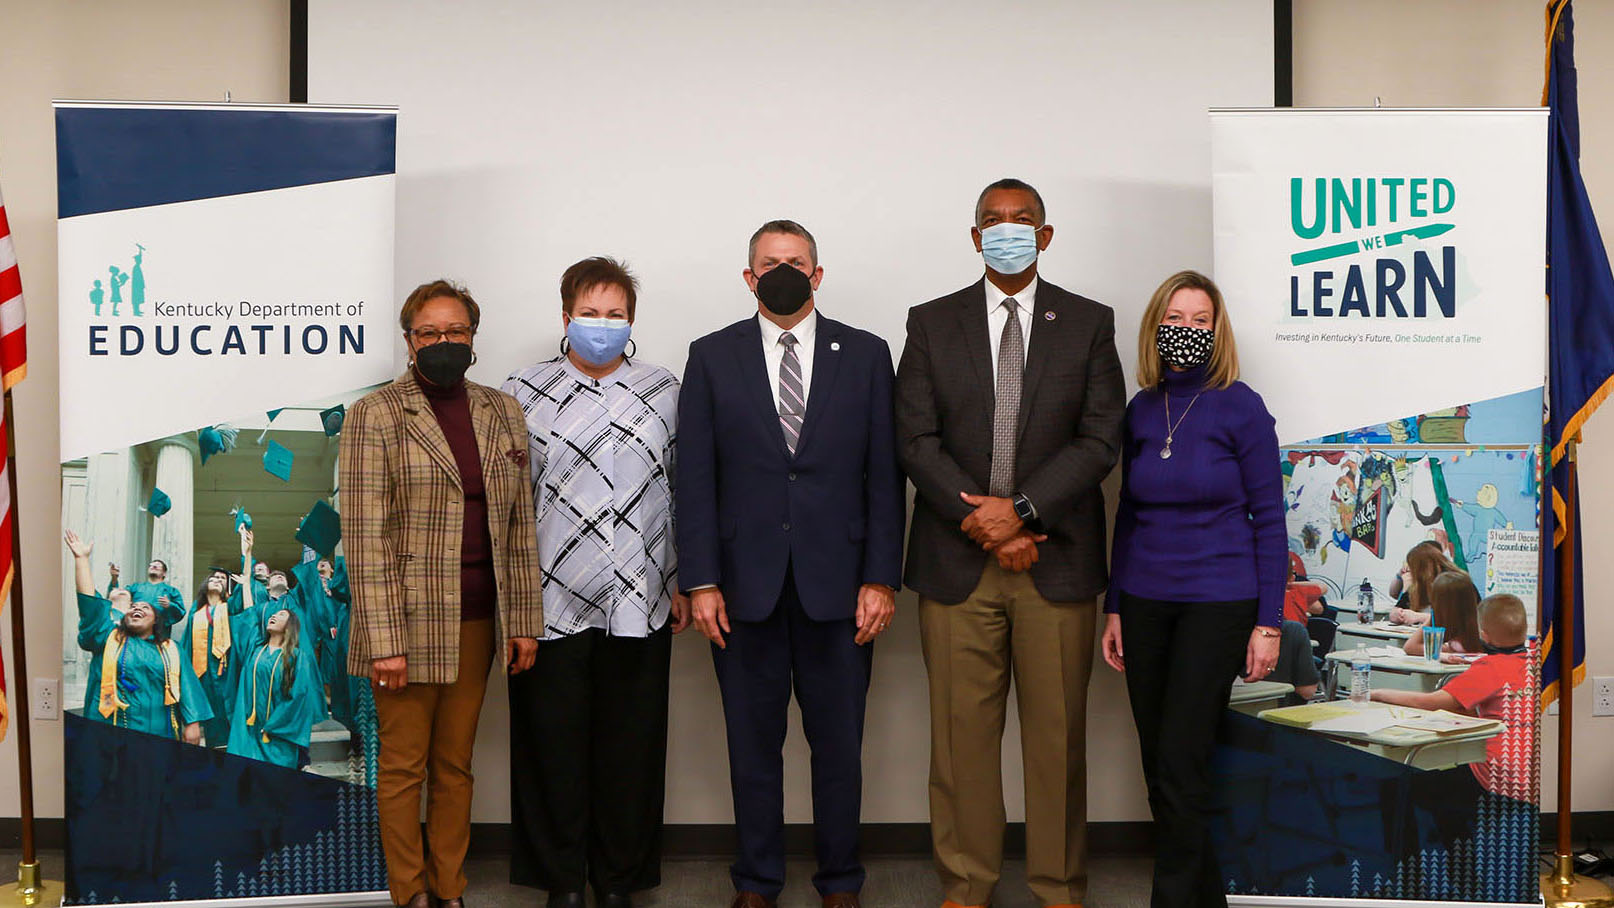 A picture of five people wearing face masks, standing between two posters reading the Kentucky Department of Education and United We Learn.